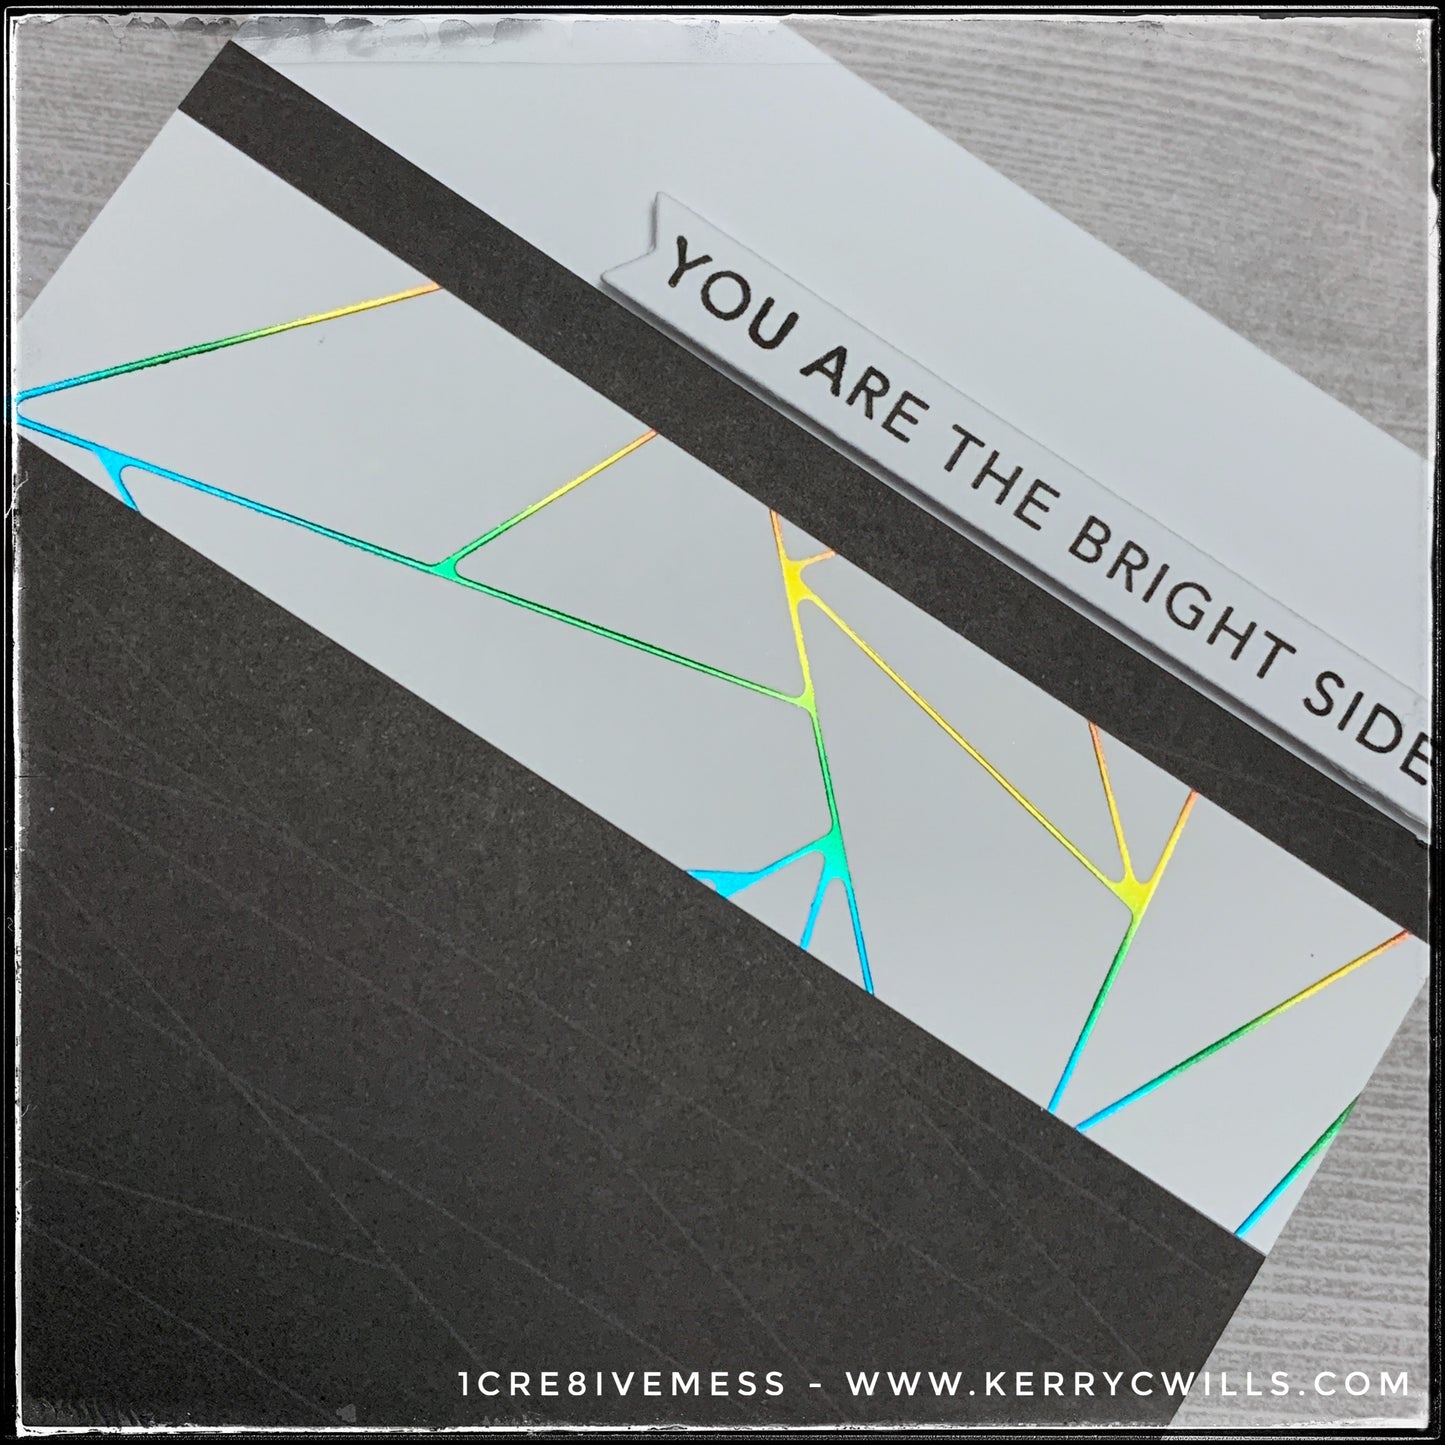 You Are The Bright Side Handmade Card